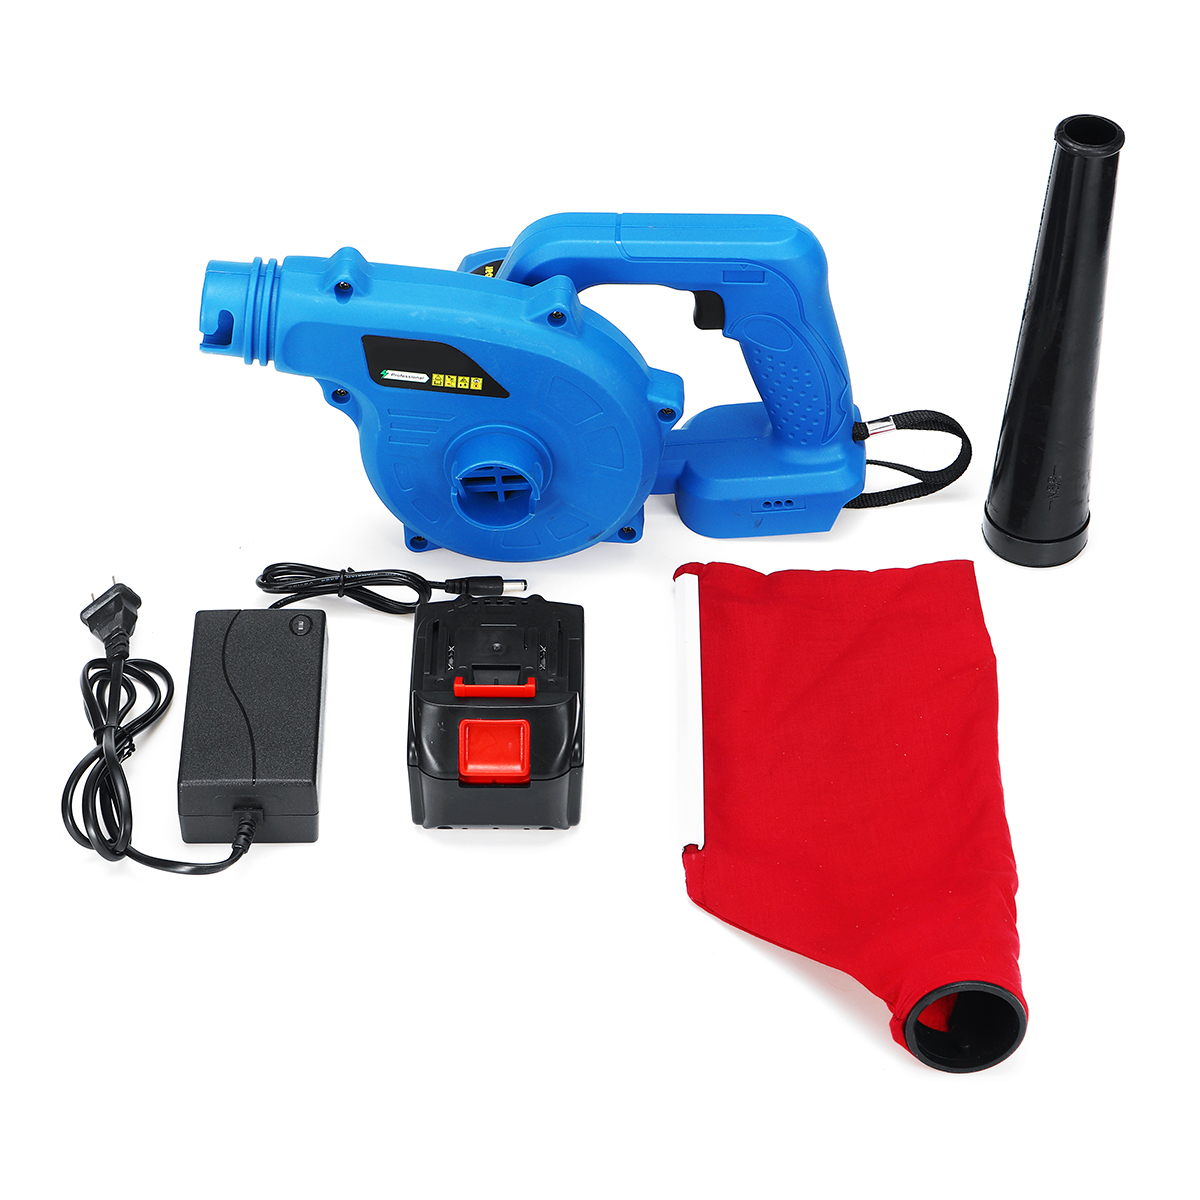 220v-1200W-Electric-Wireless-Handheld-Blower-Computer-Dust-Collector-Rechargeable-Lithium-One-Batter-1562214-1